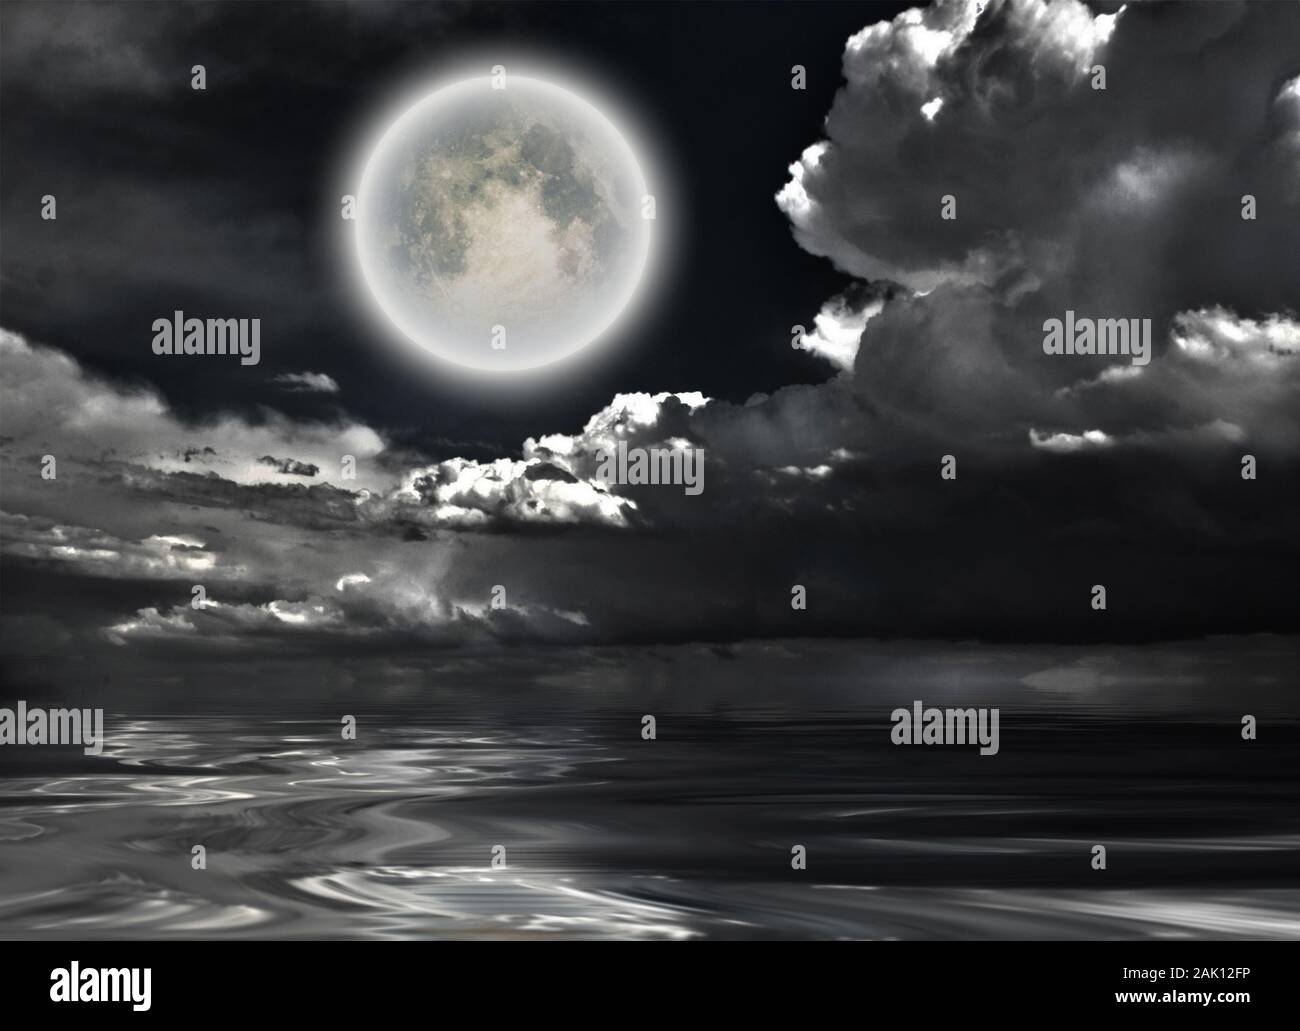 Full Moon Dramatic Clouds Reflected In Calm Water Stock Photo Alamy